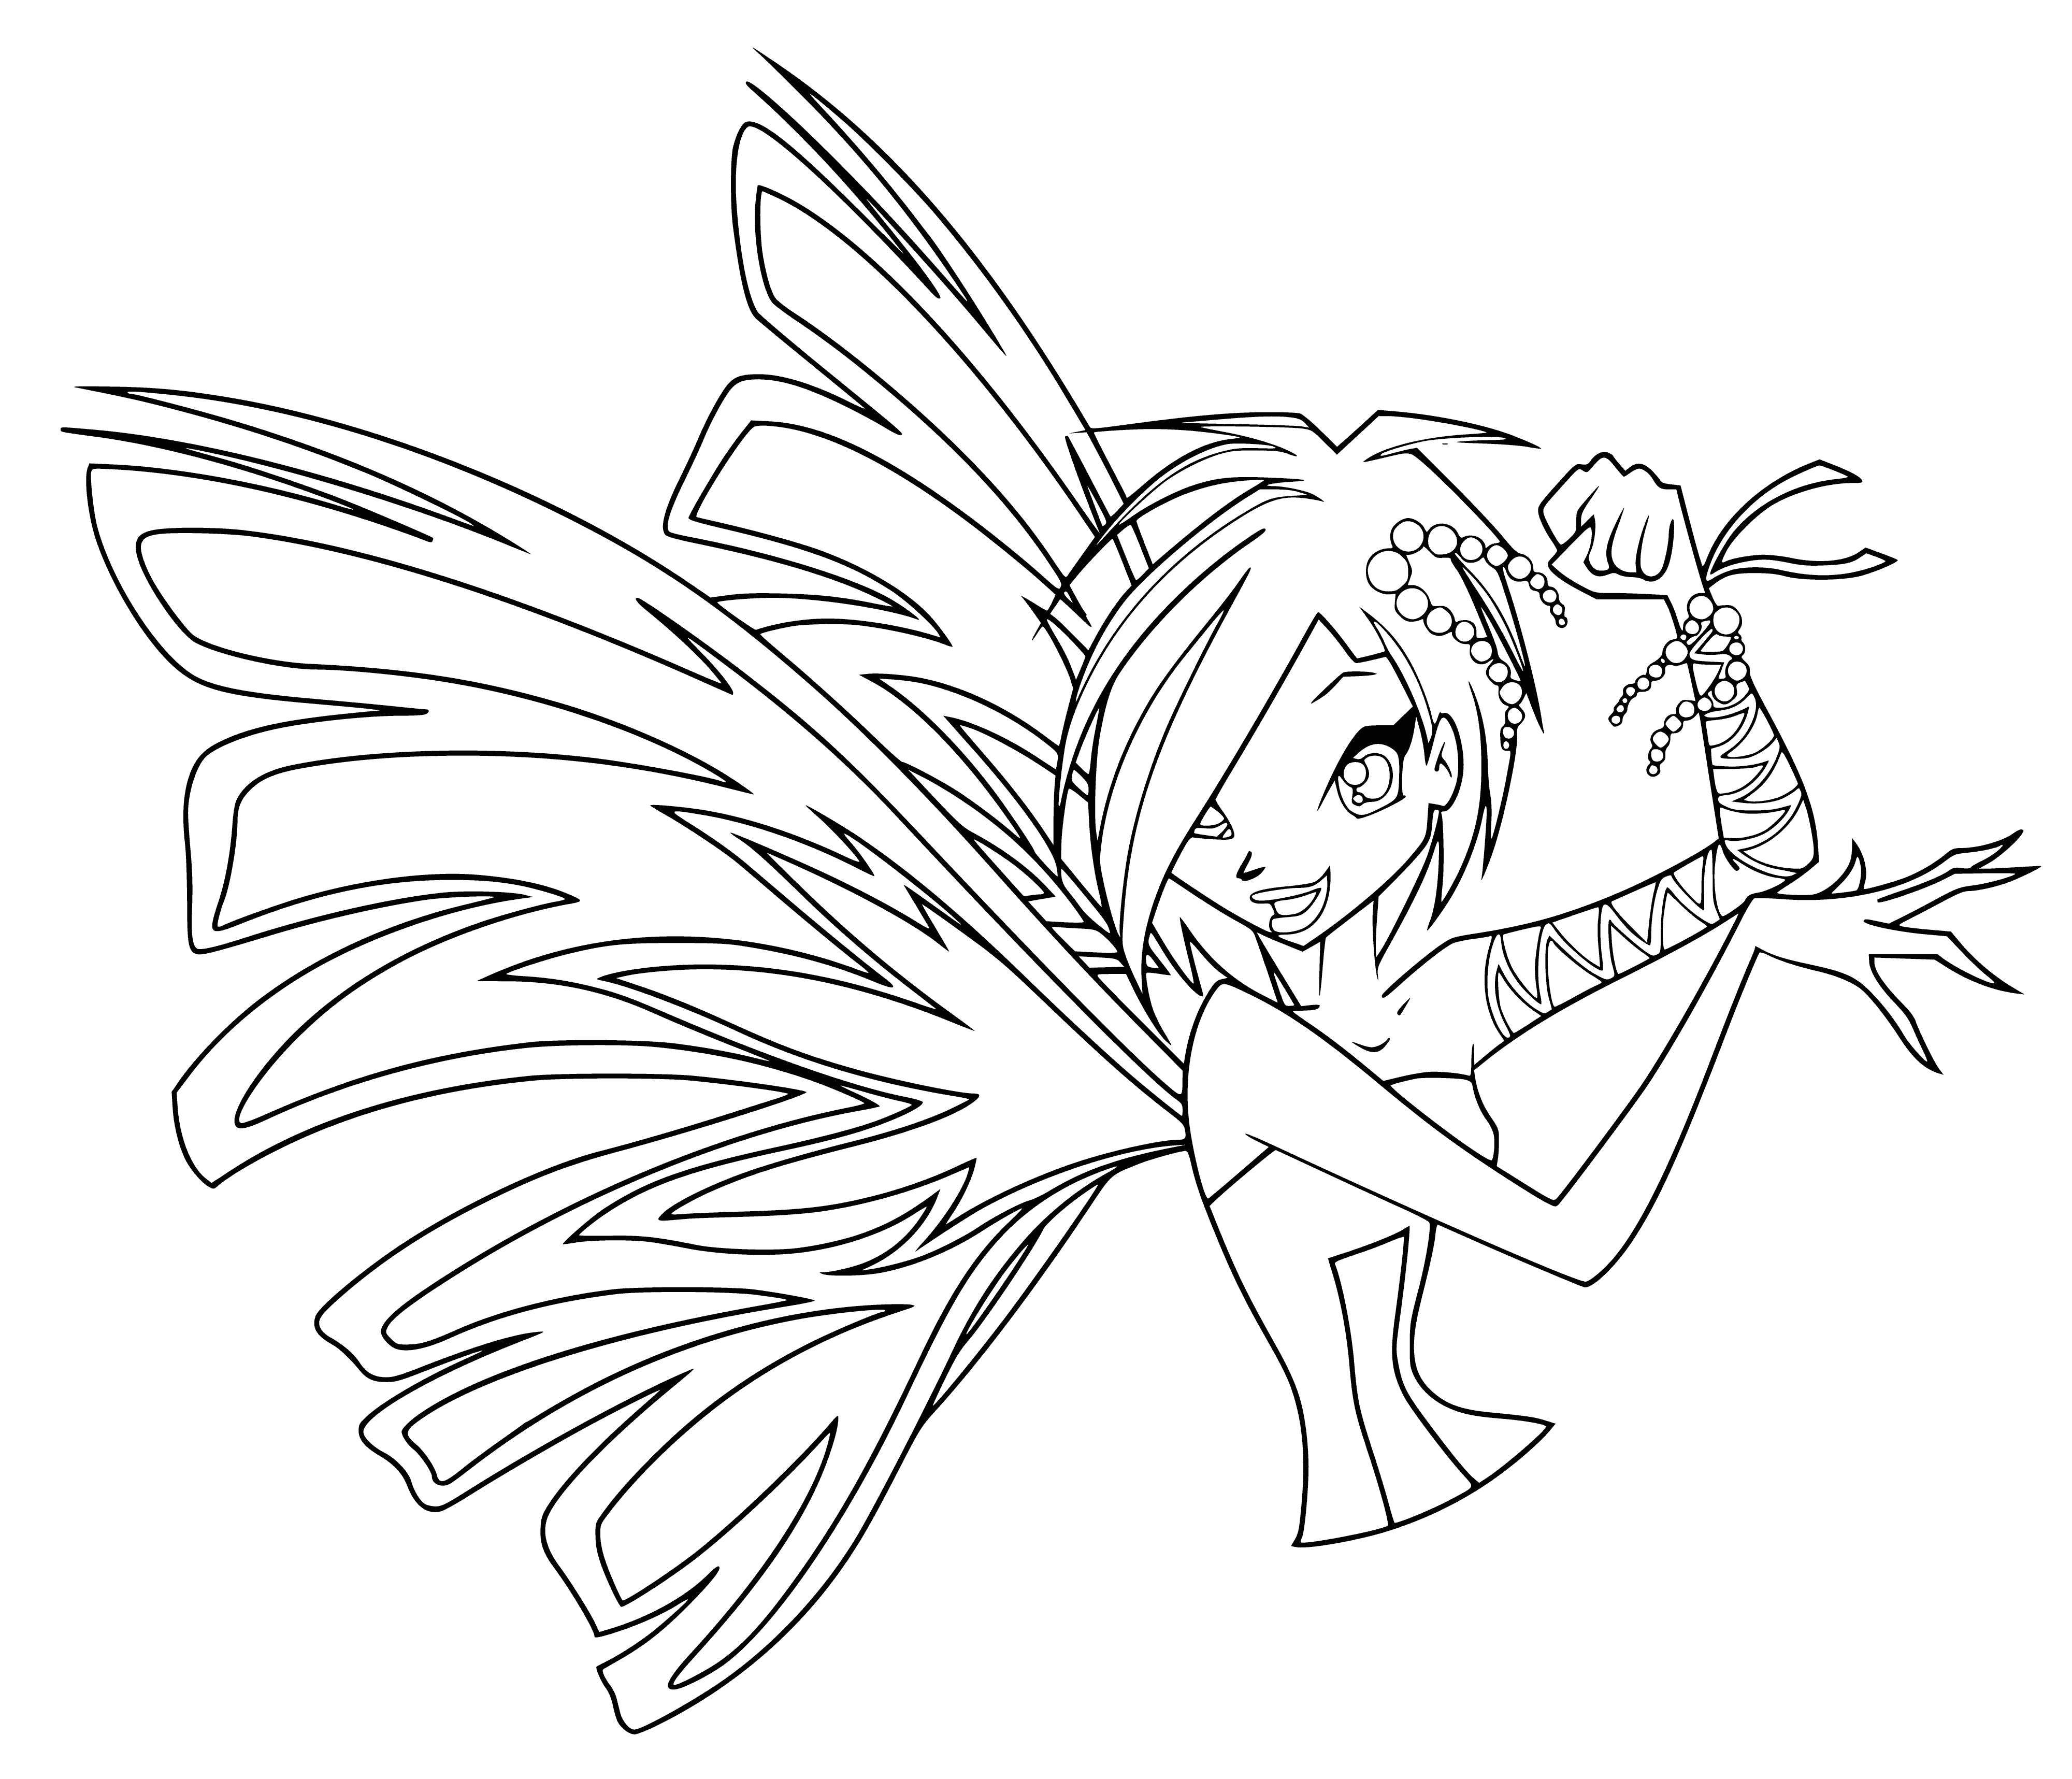 coloring page: Tecna achieved Sirenix while wearing a blue and white dress, with a shell in her hair and holding a staff. Her wings were blue and white.